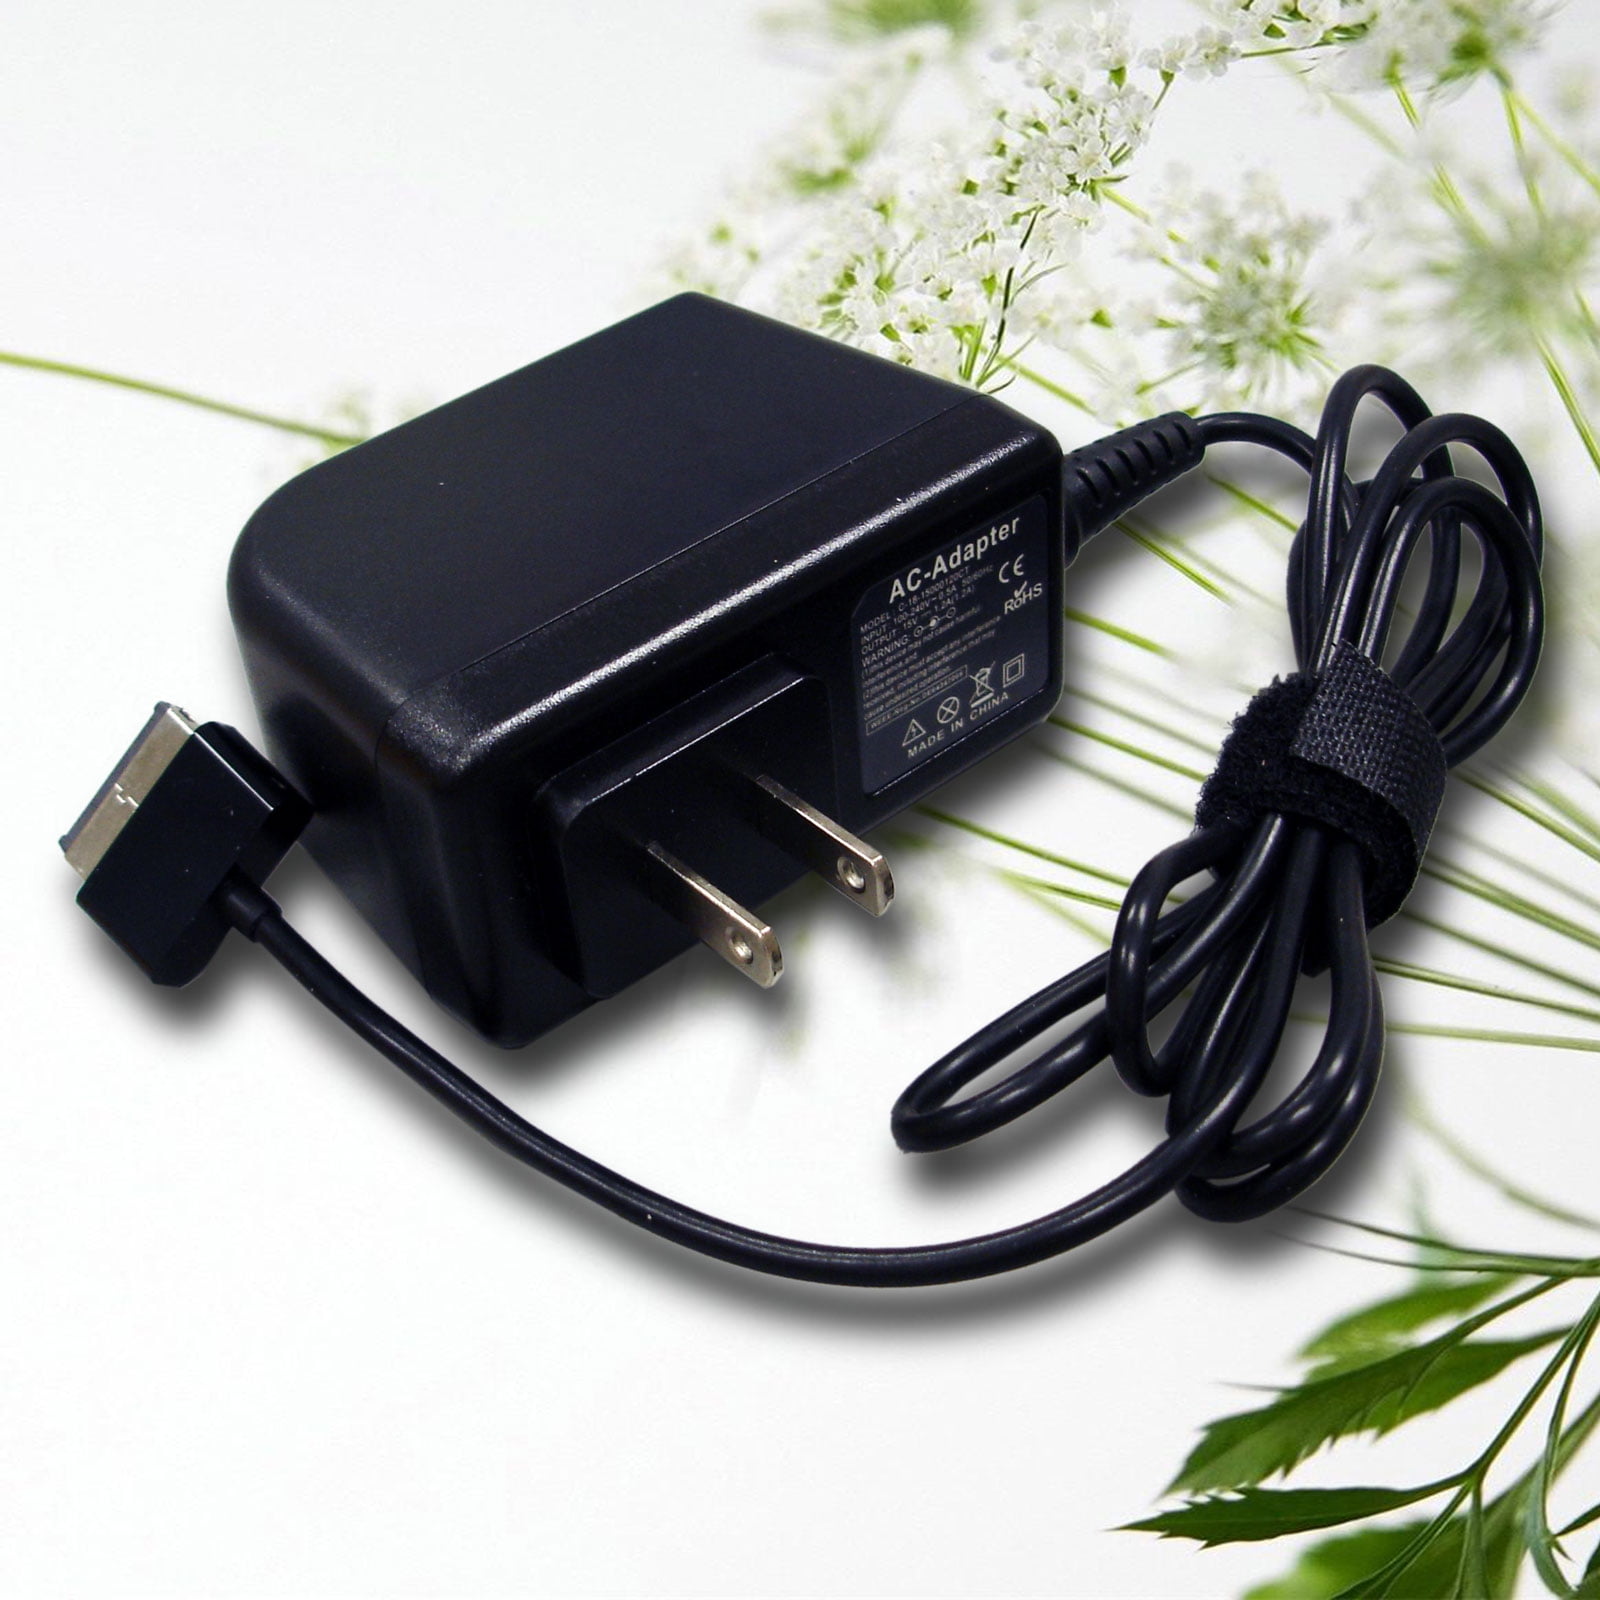 AC Home Wall Charger&USB Cable for Asus Transformer Tf700 Tf700t TF300 Tablet US 